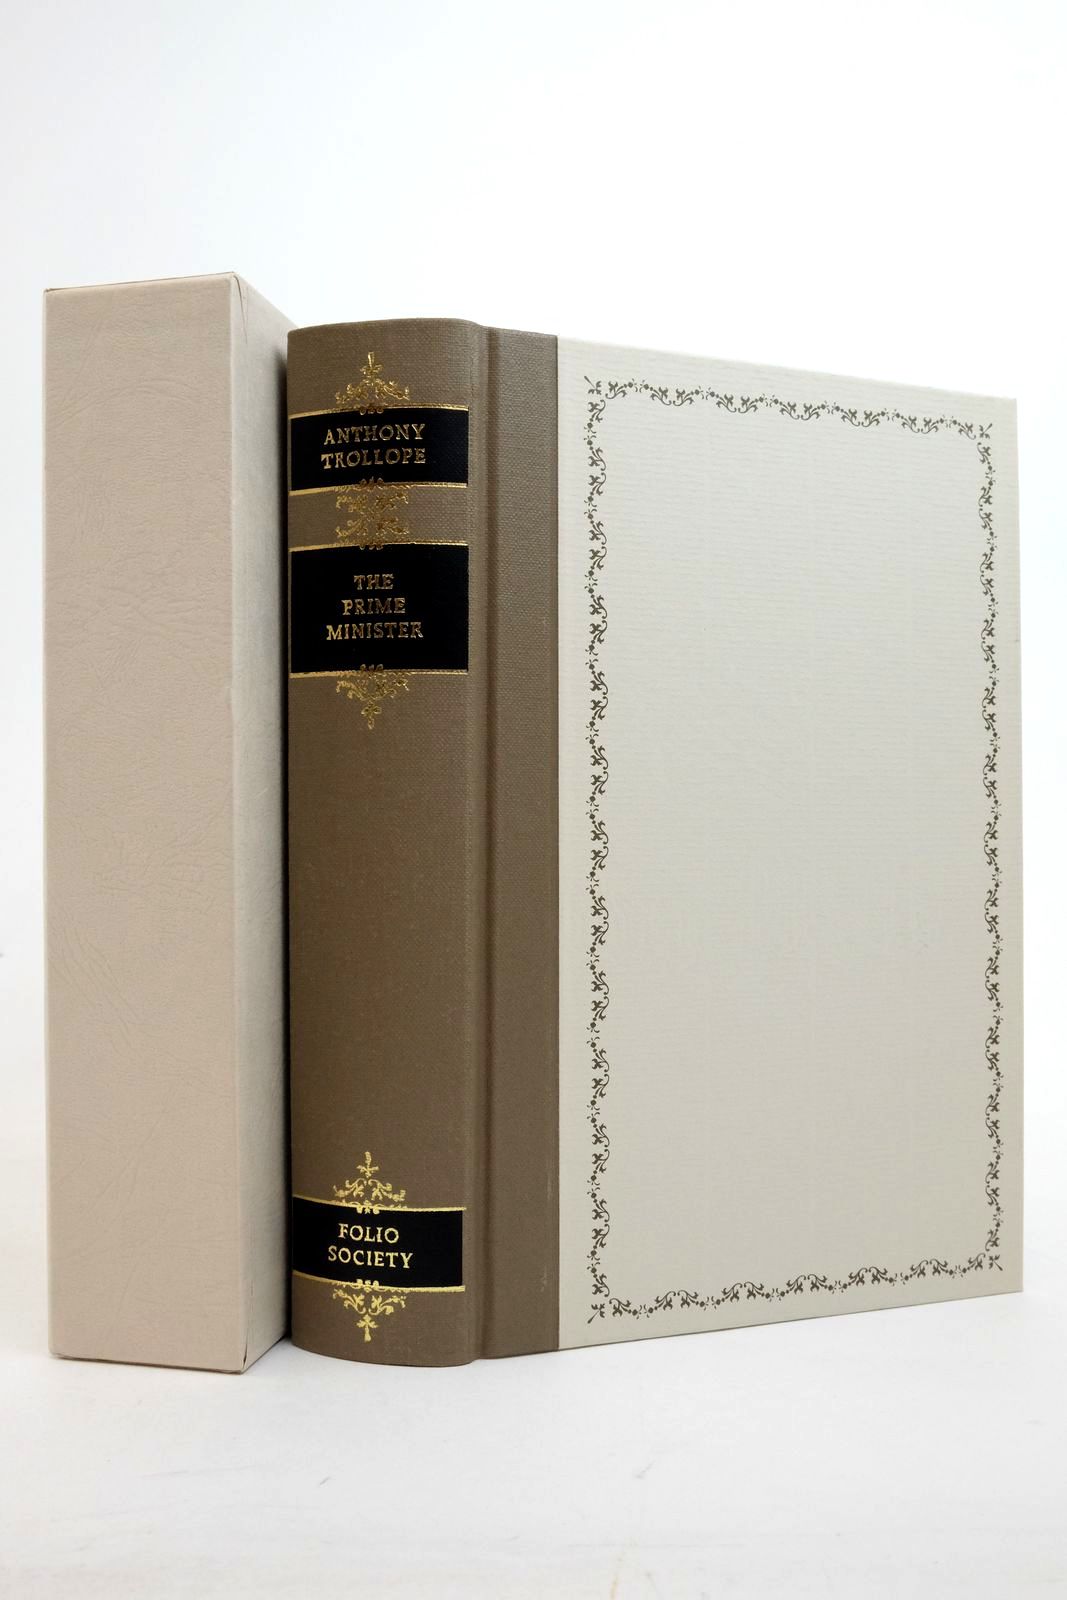 Photo of THE PRIME MINISTER written by Trollope, Anthony Briggs, Asa illustrated by Thomas, Llewellyn published by Folio Society (STOCK CODE: 2138319)  for sale by Stella & Rose's Books